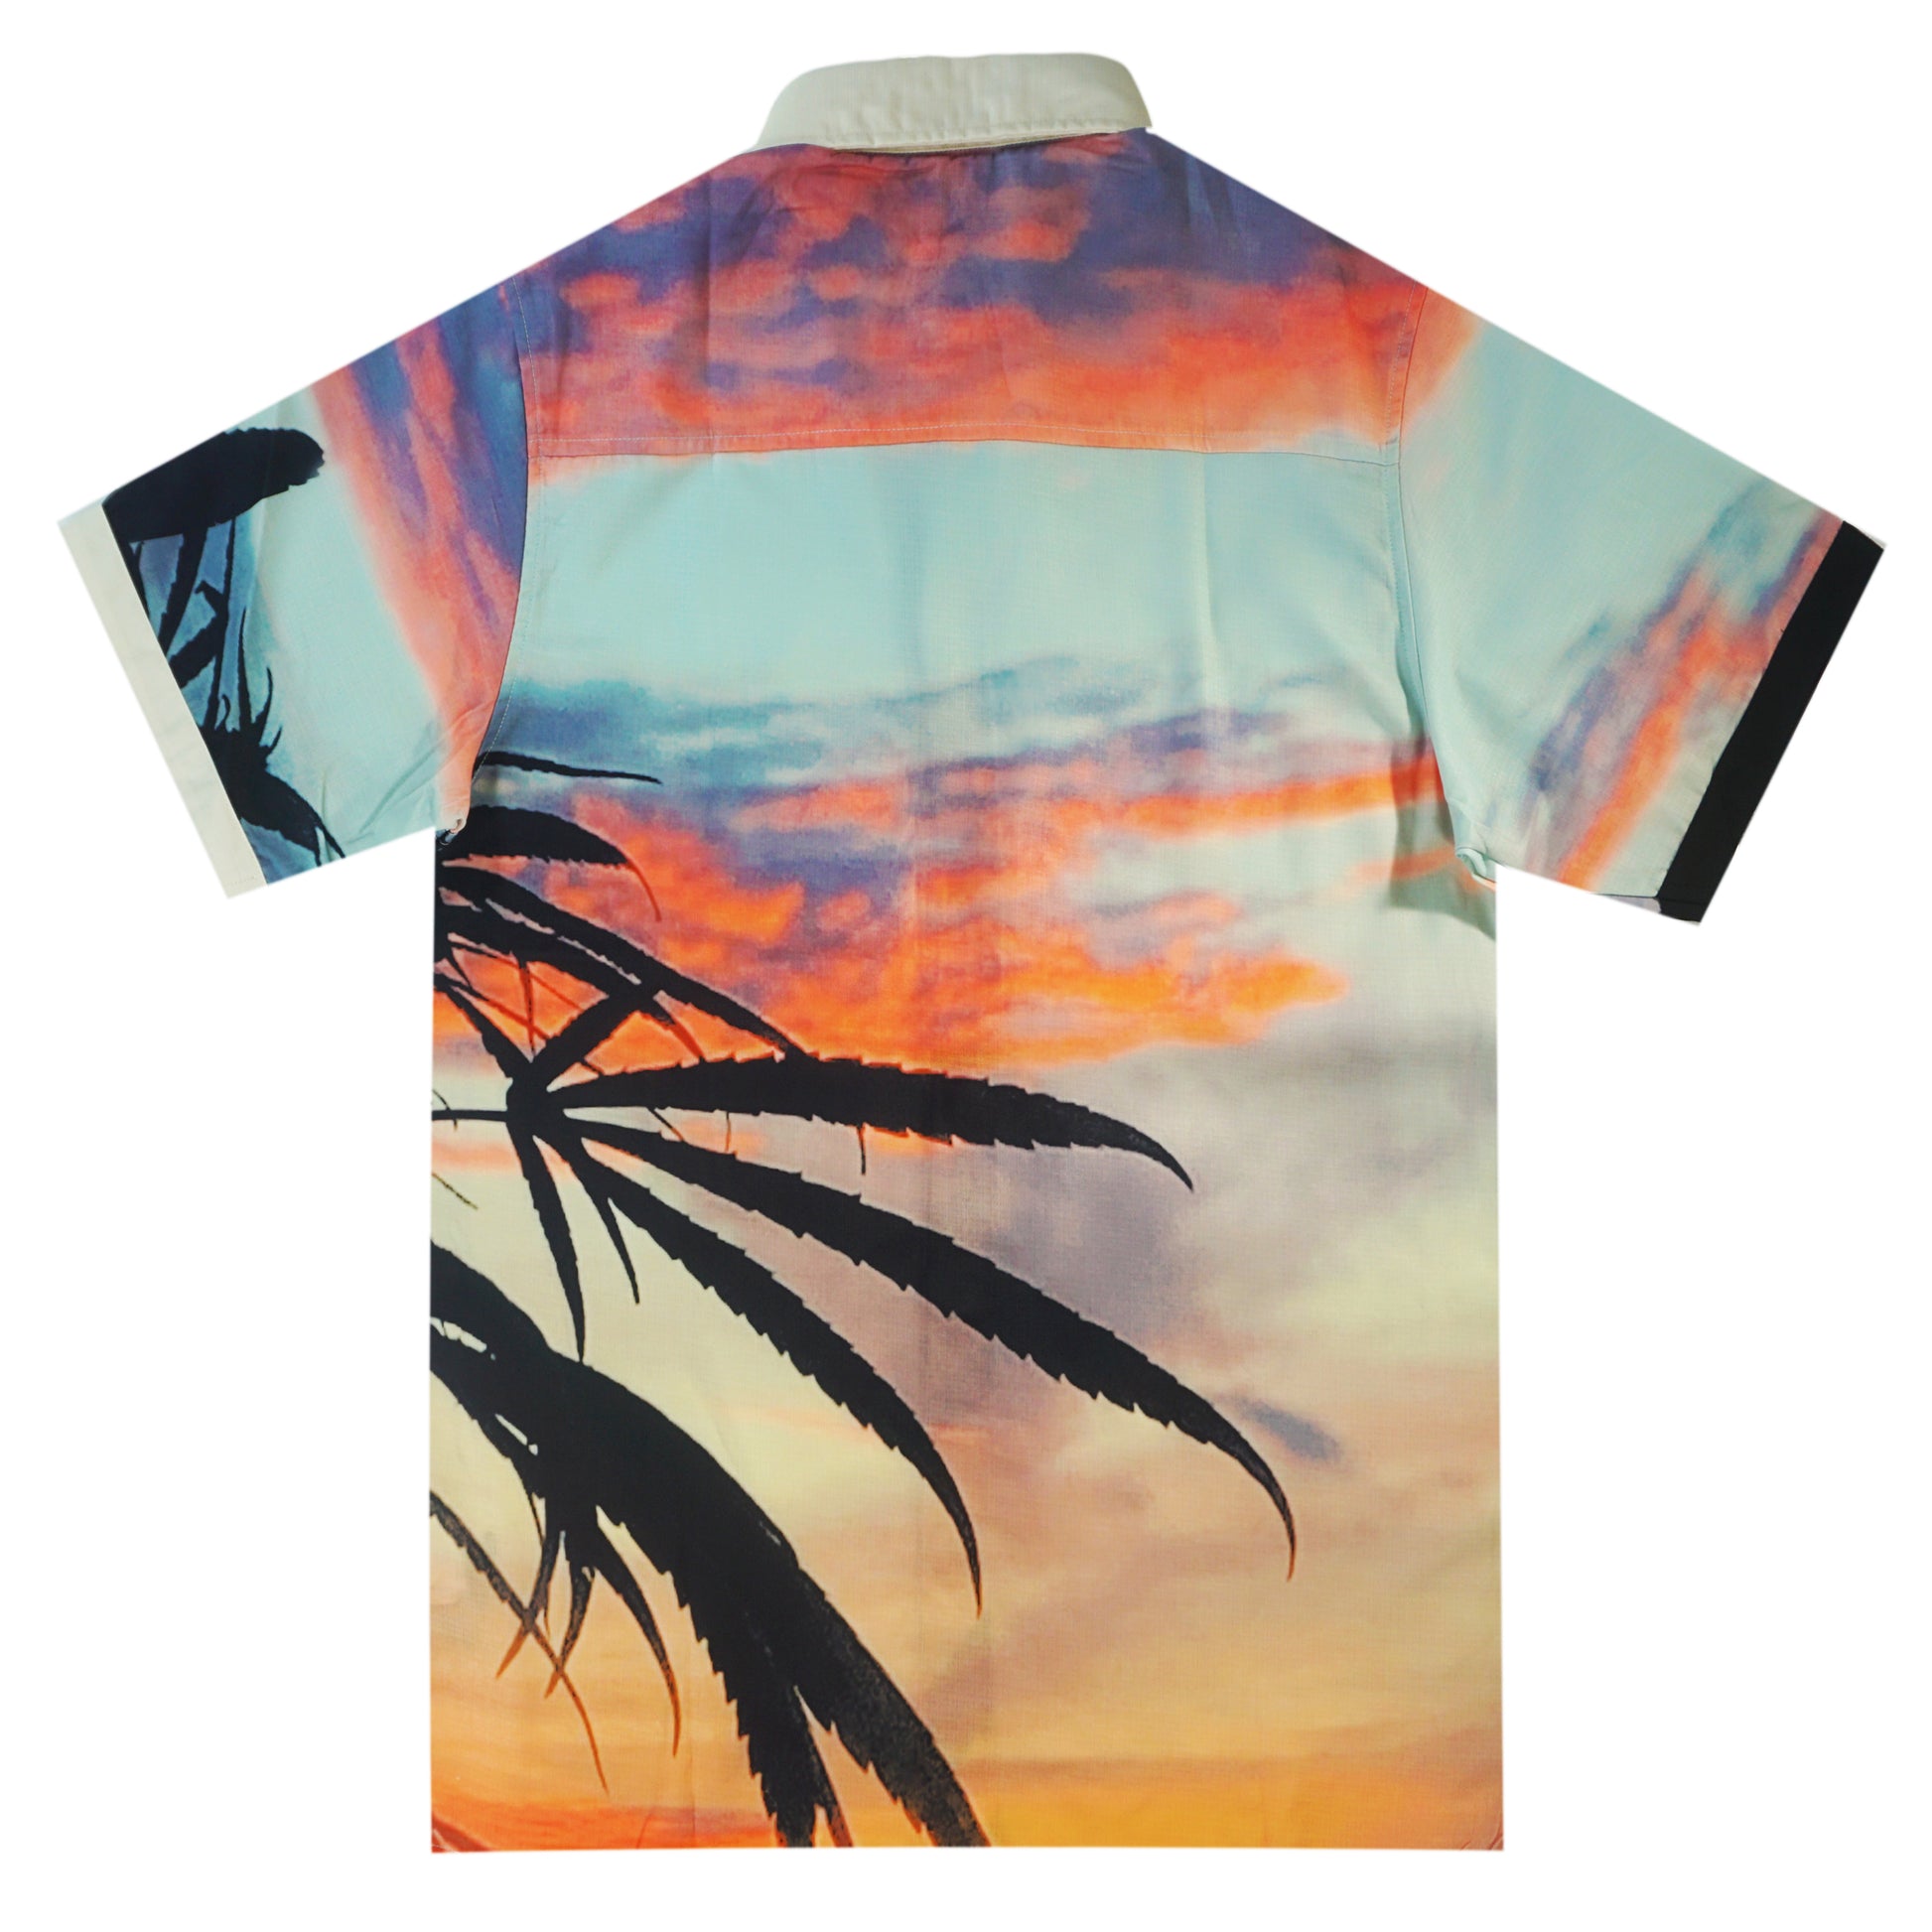 Men, Boys, Teens, Gifts, Wmns, Girls, Urban, Style, Fashion, Mens Tees, Womens Tees, Teen Tees, Boys Tees, Urban Apparel, Button Up Tee, In the Clouds Button Up Shirt, Sunset, The Hideout Clothing, 